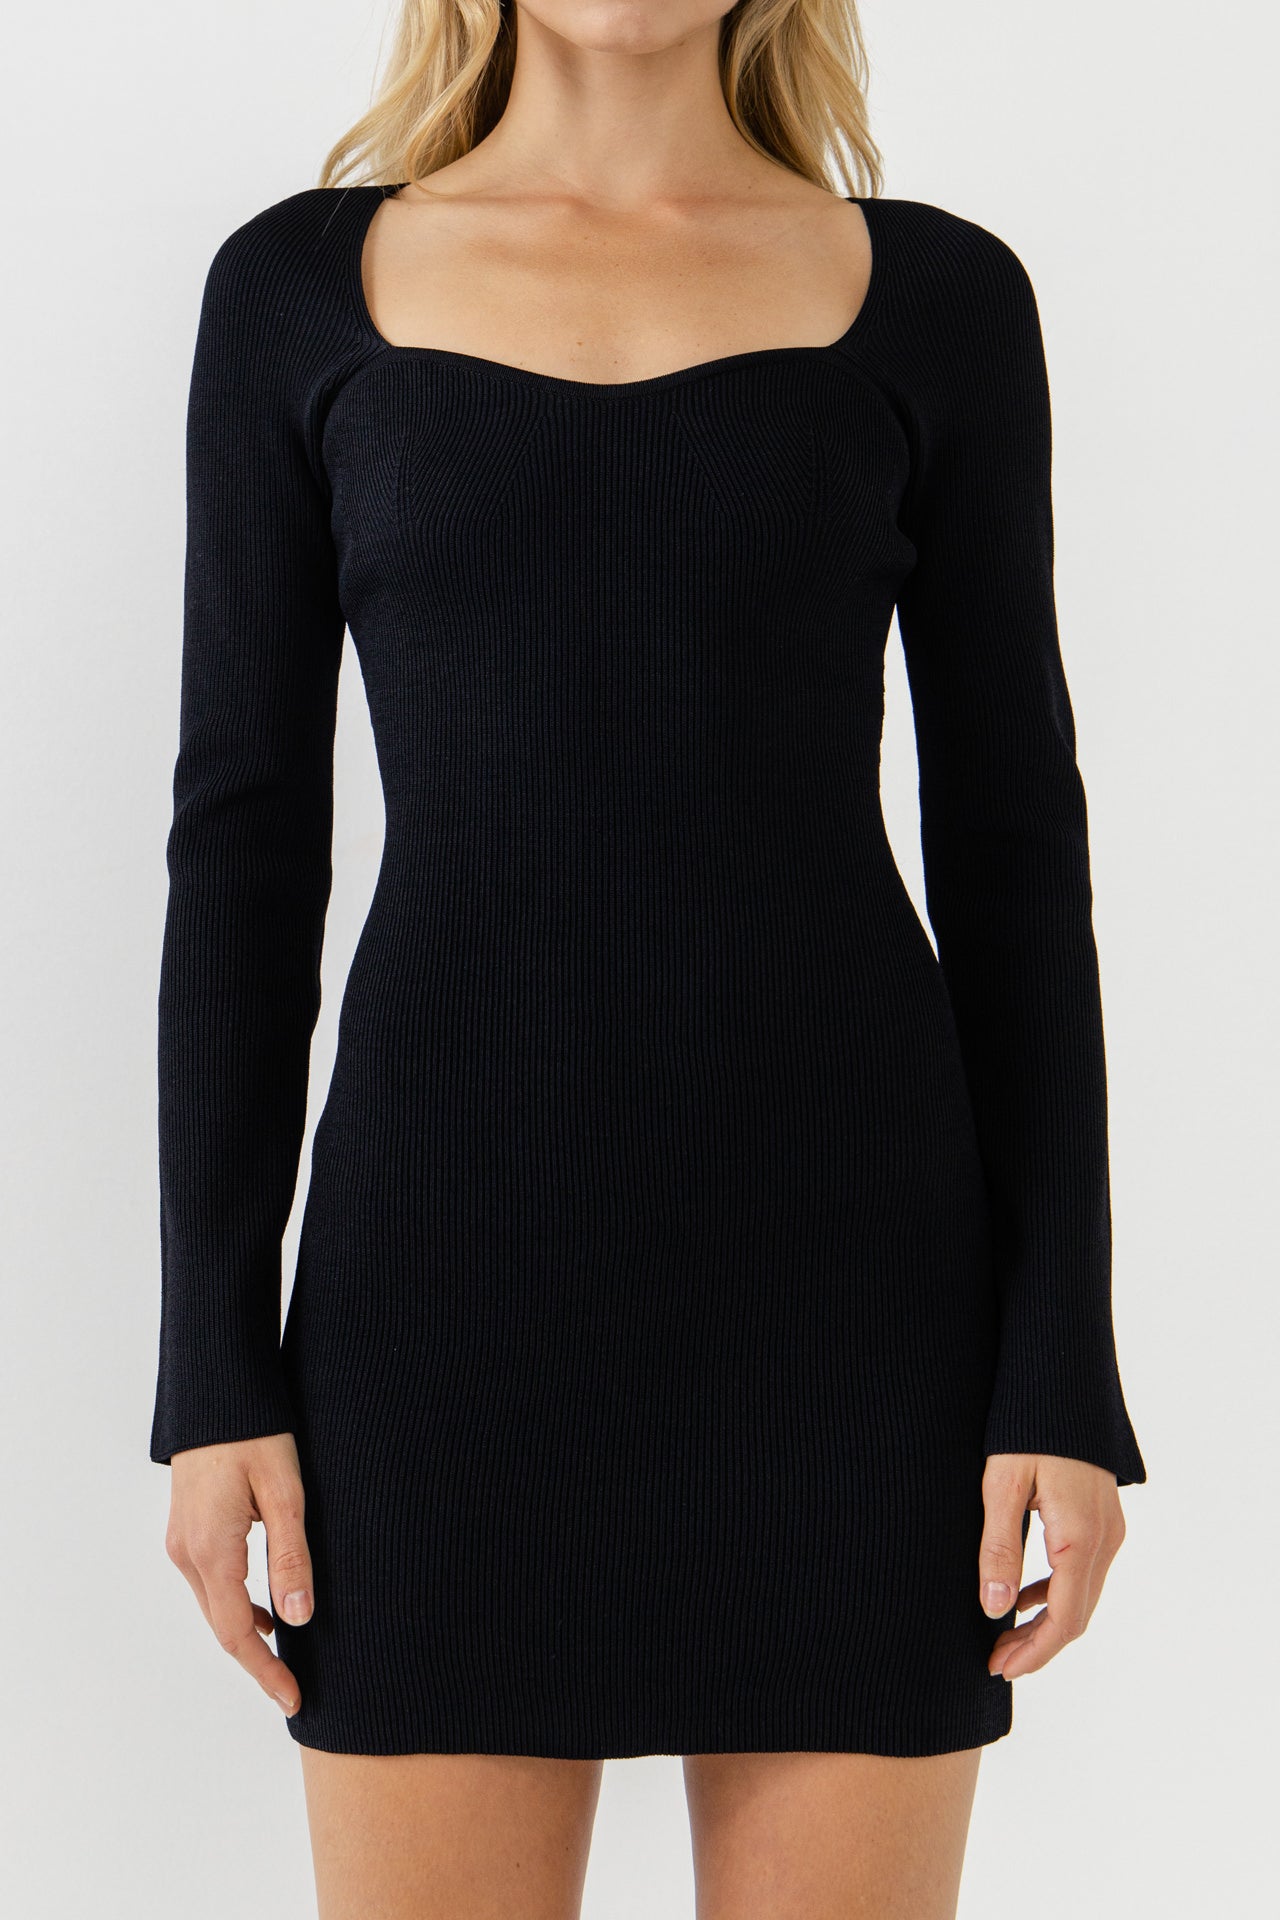 ENDLESS ROSE - Square Neckline Knit Mini Dress - DRESSES available at Objectrare